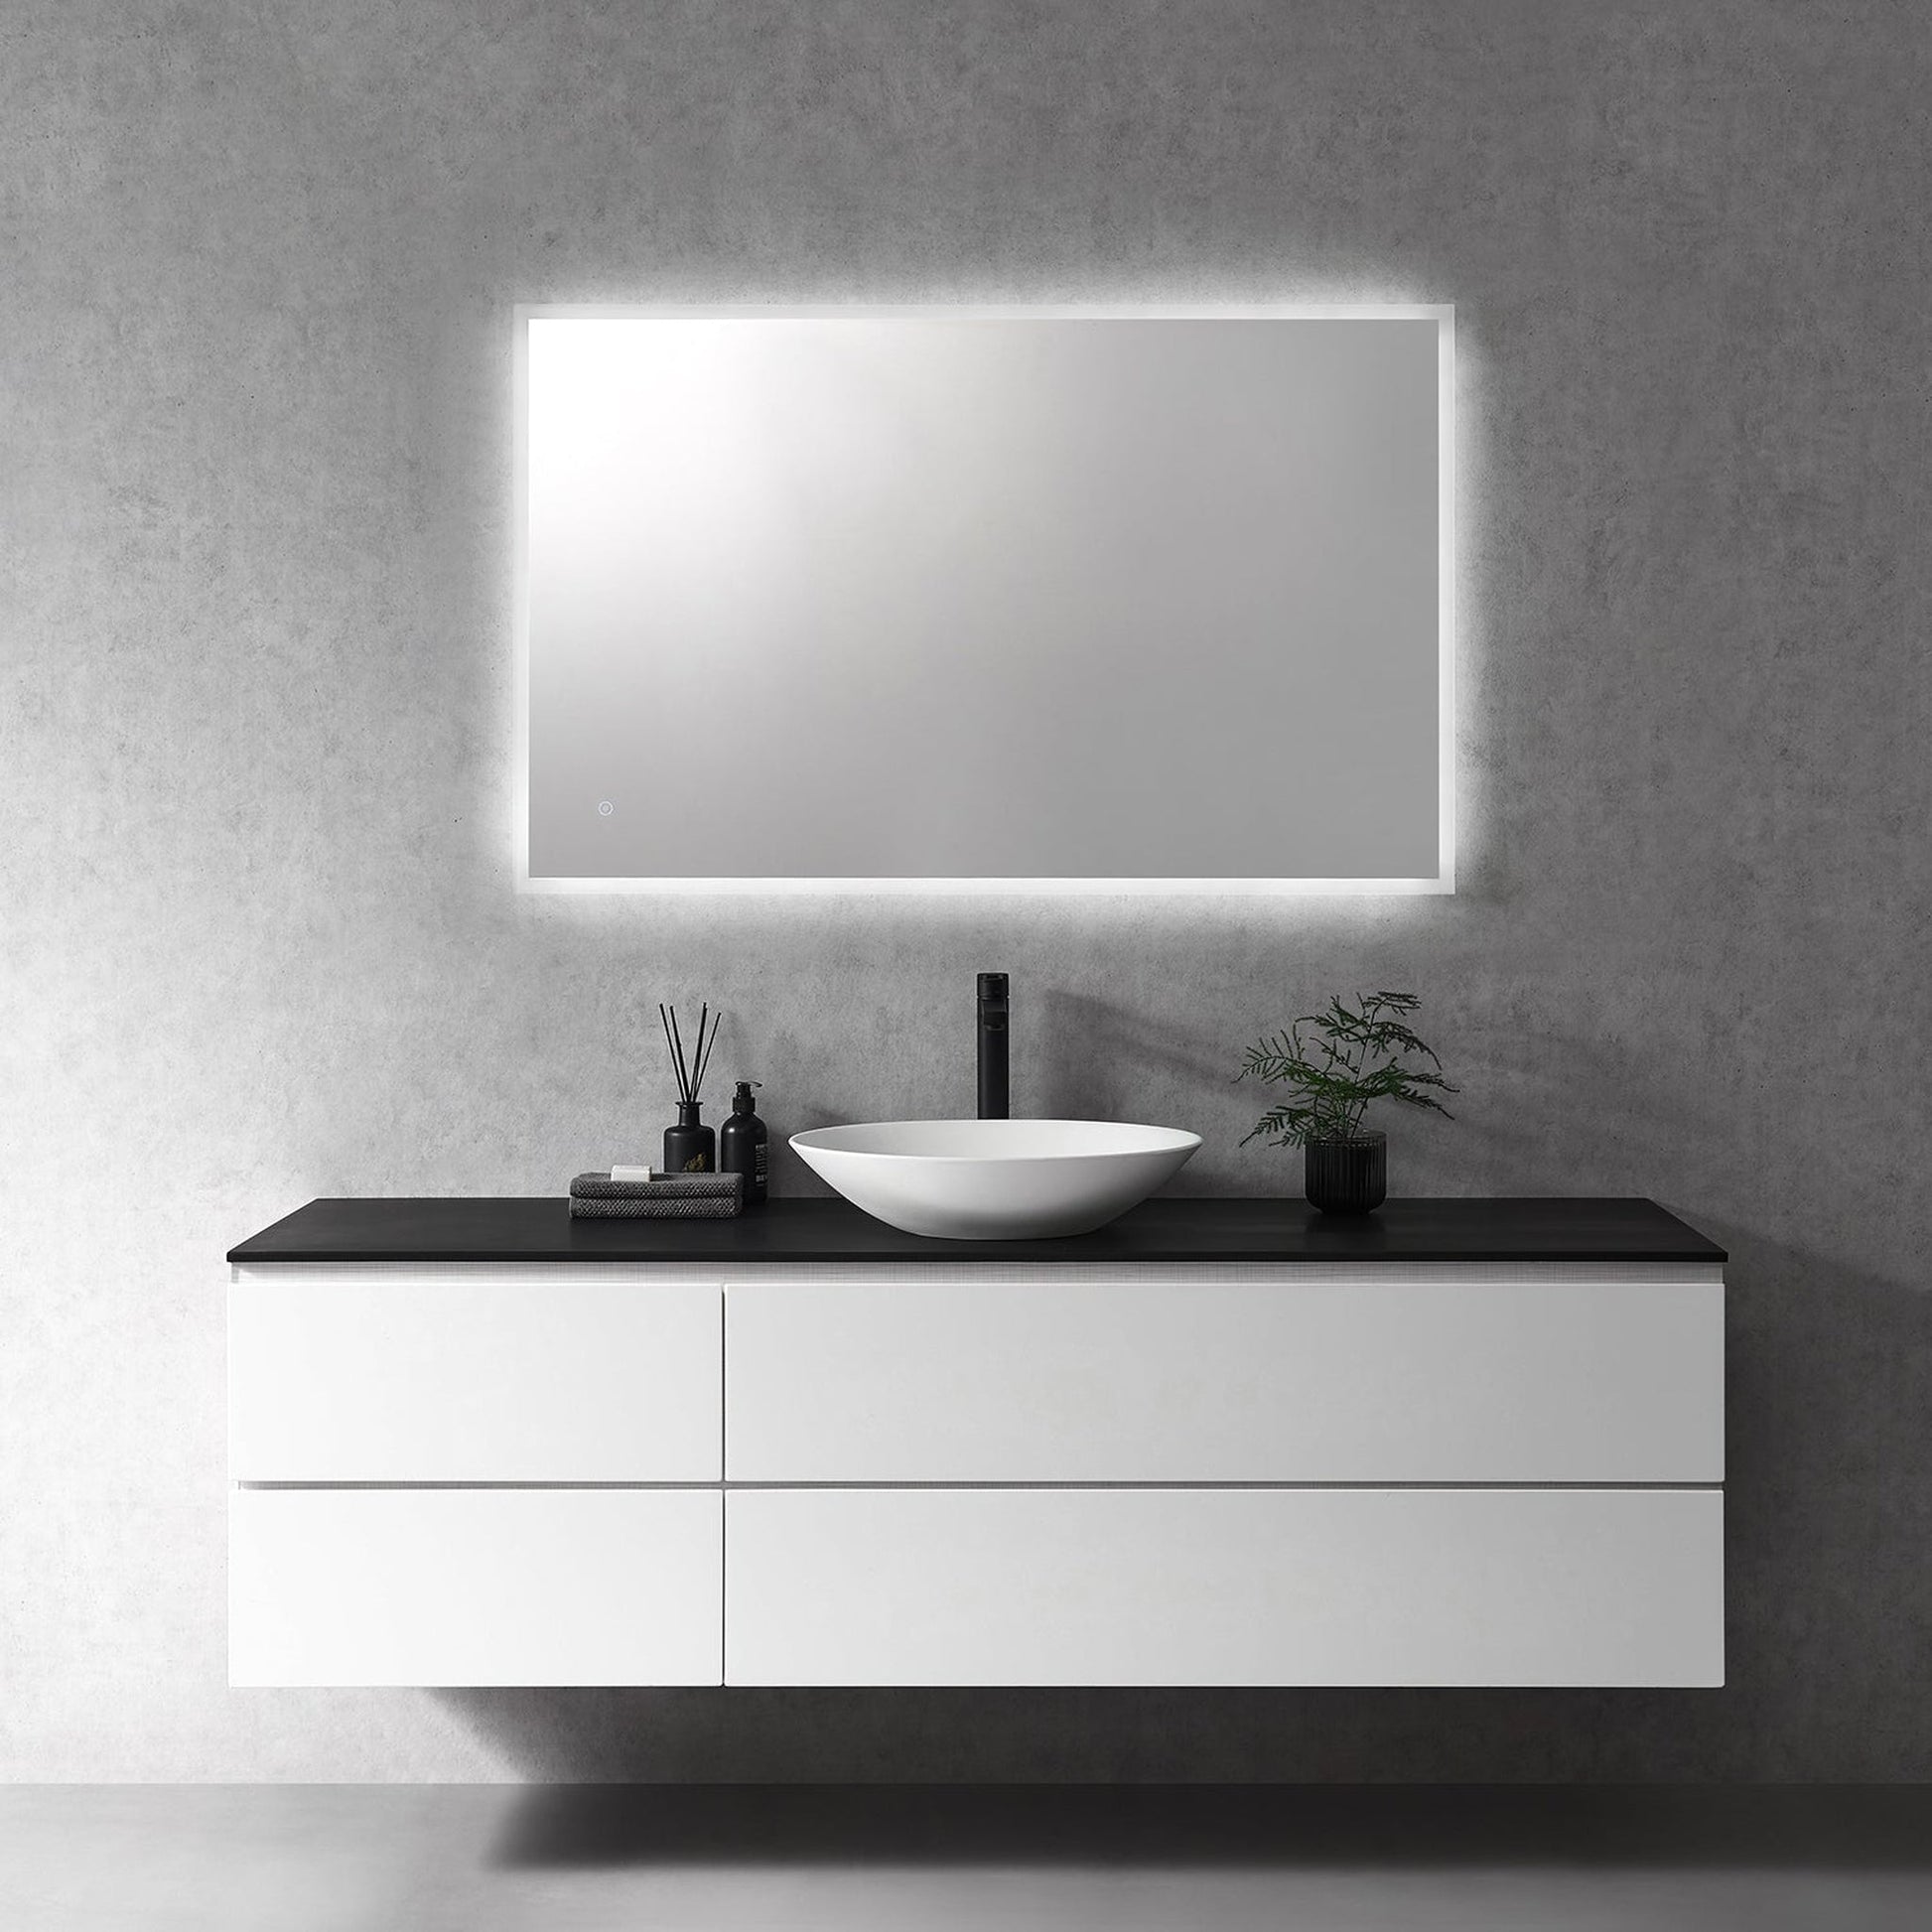 Altair Cassano 48" Rectangle Wall-Mounted LED Mirror